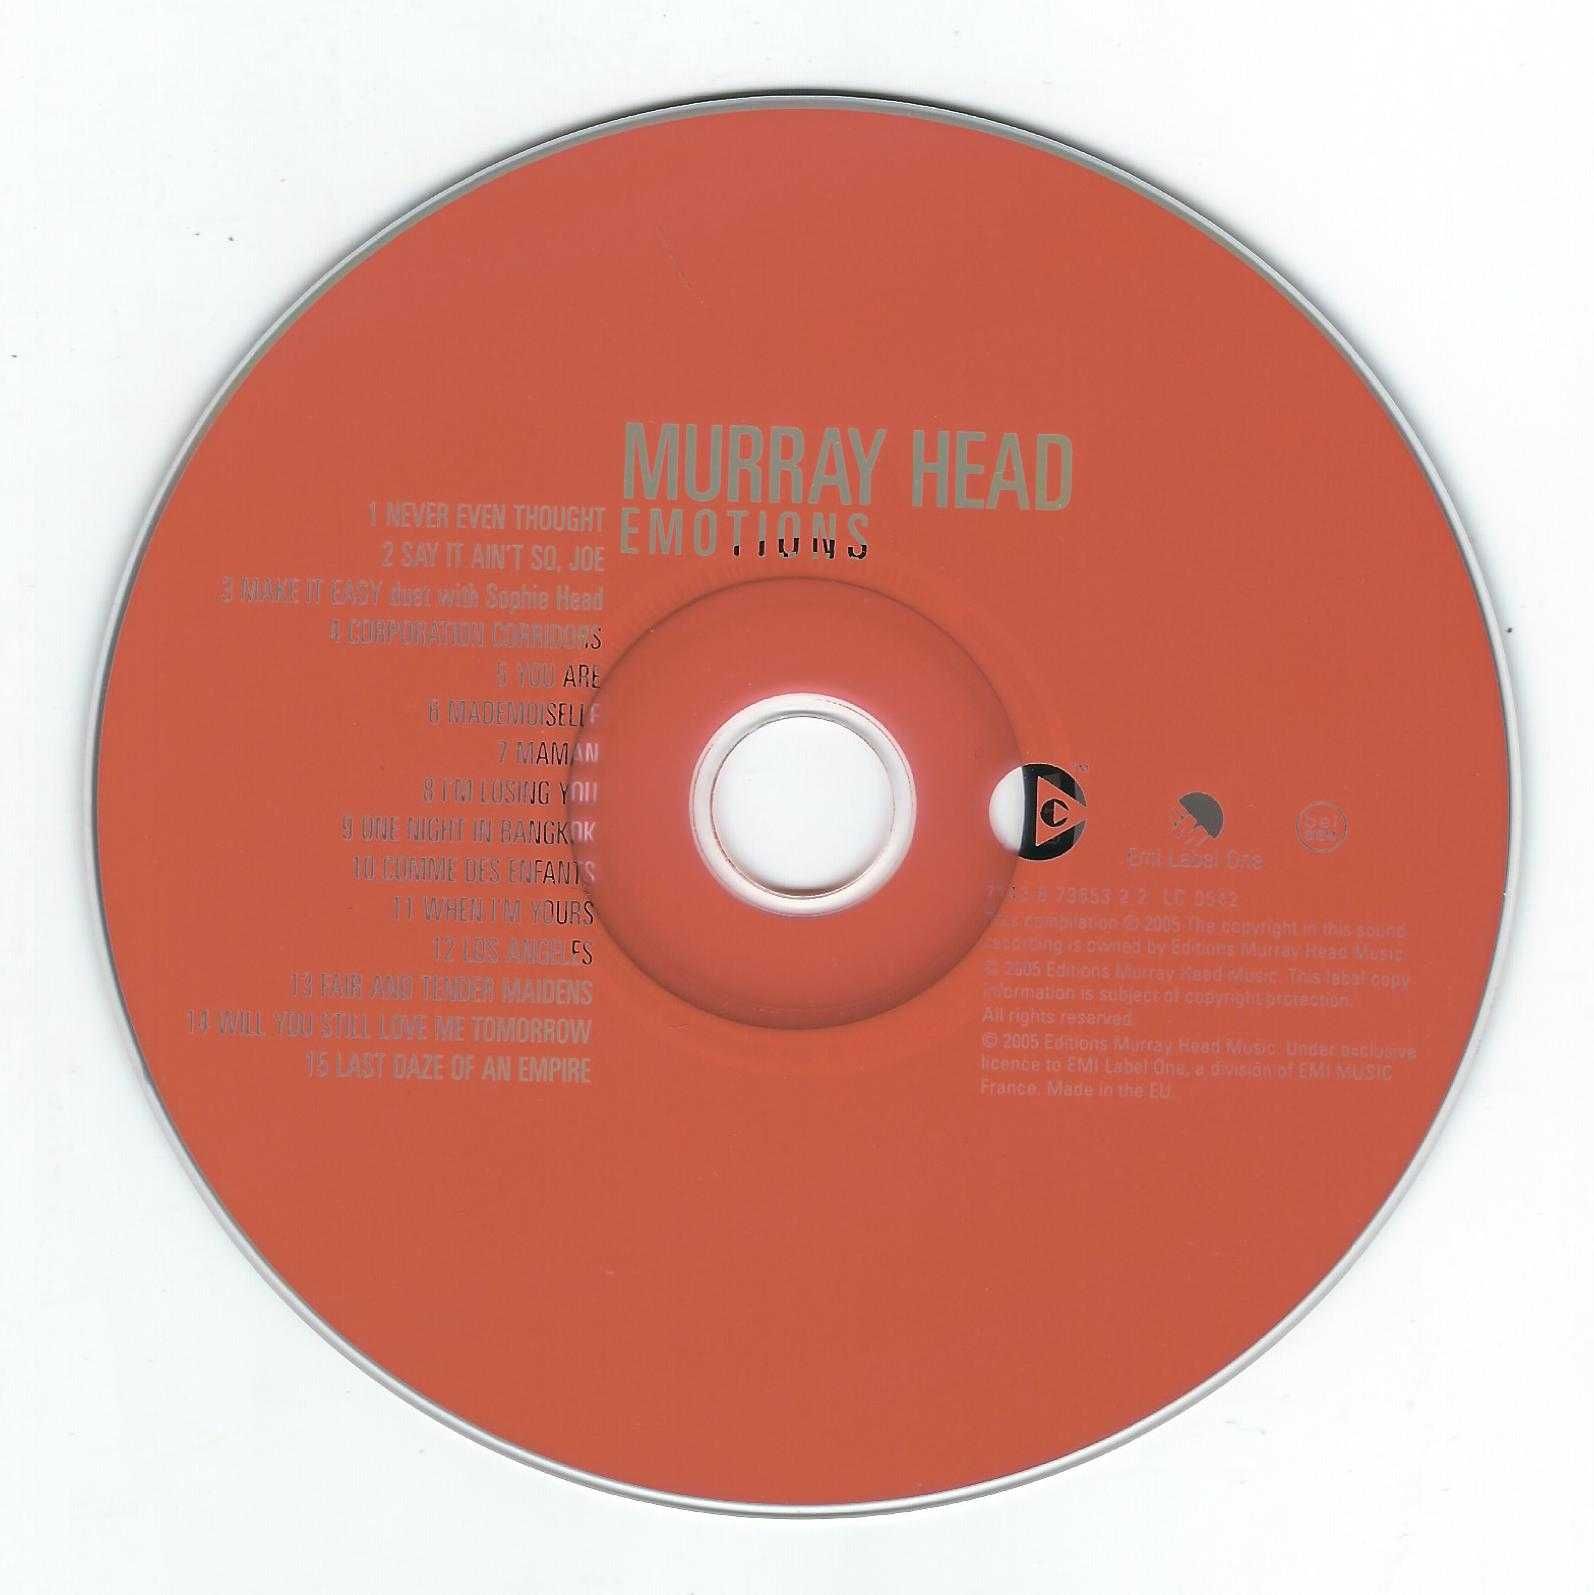 CD Murray Head - Emotions 'My Favourite Songs' (2005) (EMI)